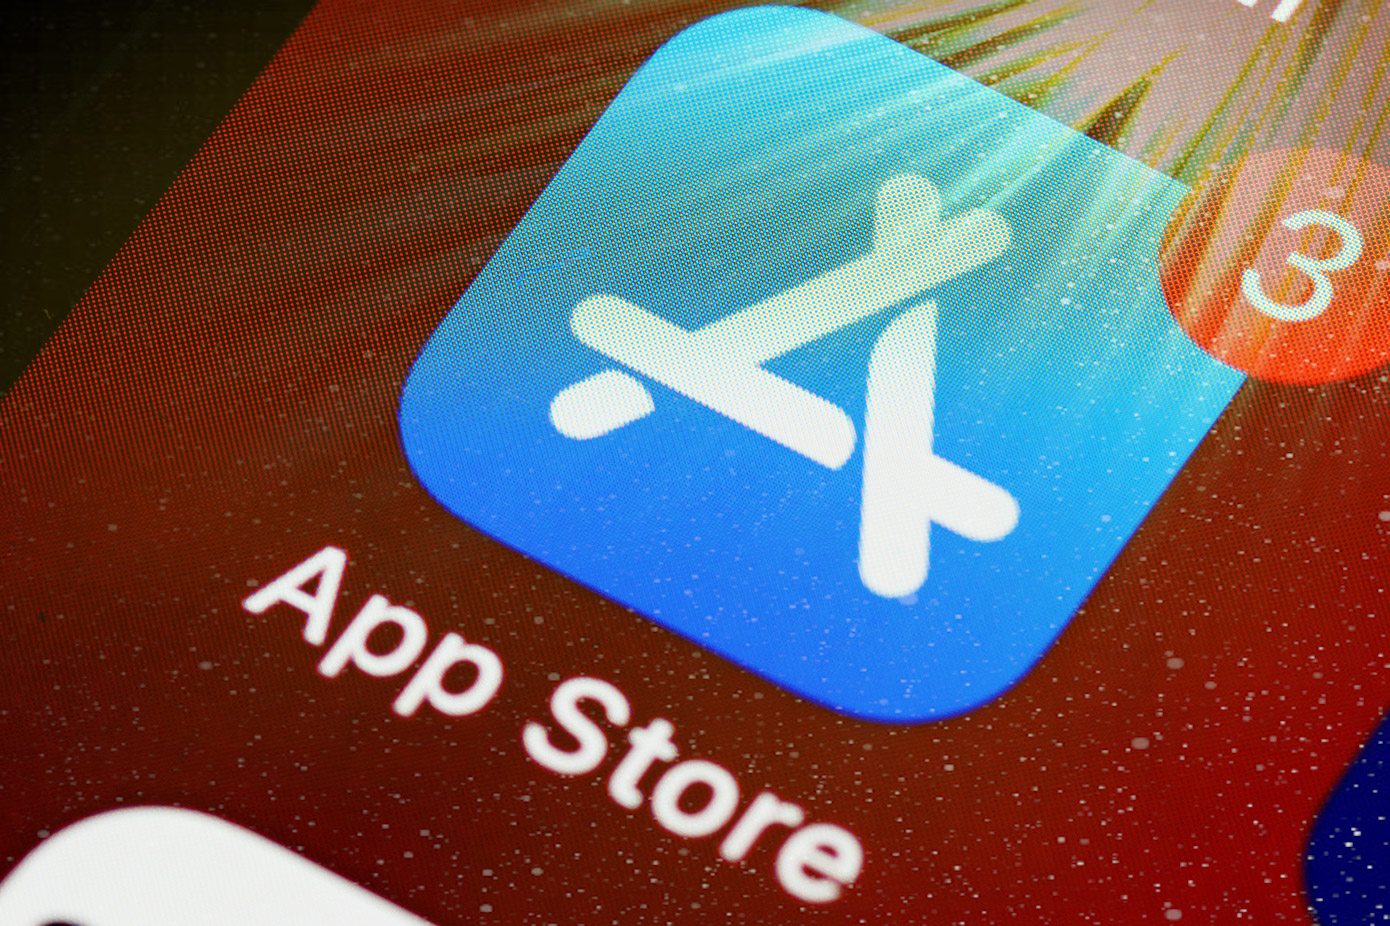 Apple’s App Store to start showing more ads